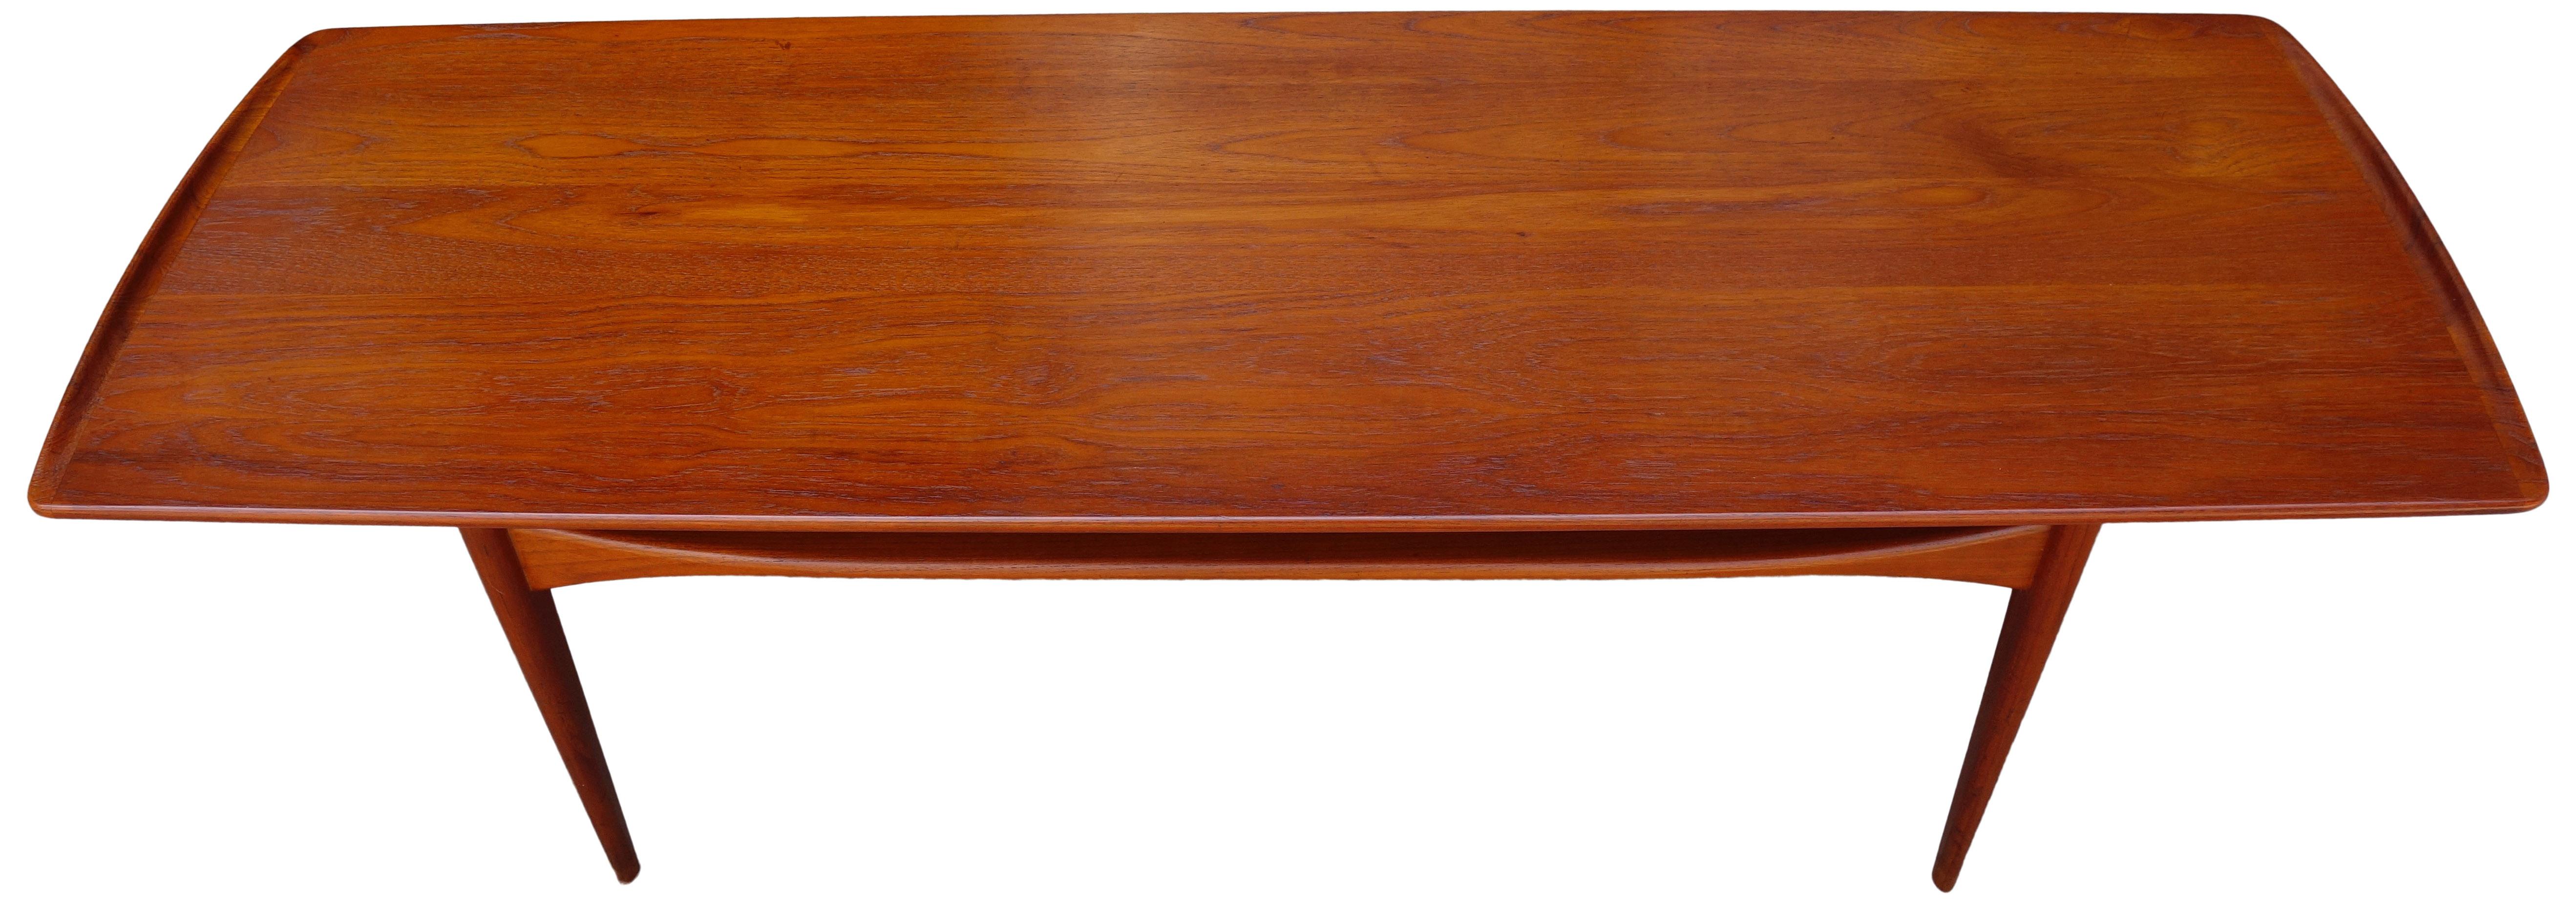 20th Century Midcentury Danish Modern Coffee Table by Kindt-Larsen for France and Daverkosen For Sale